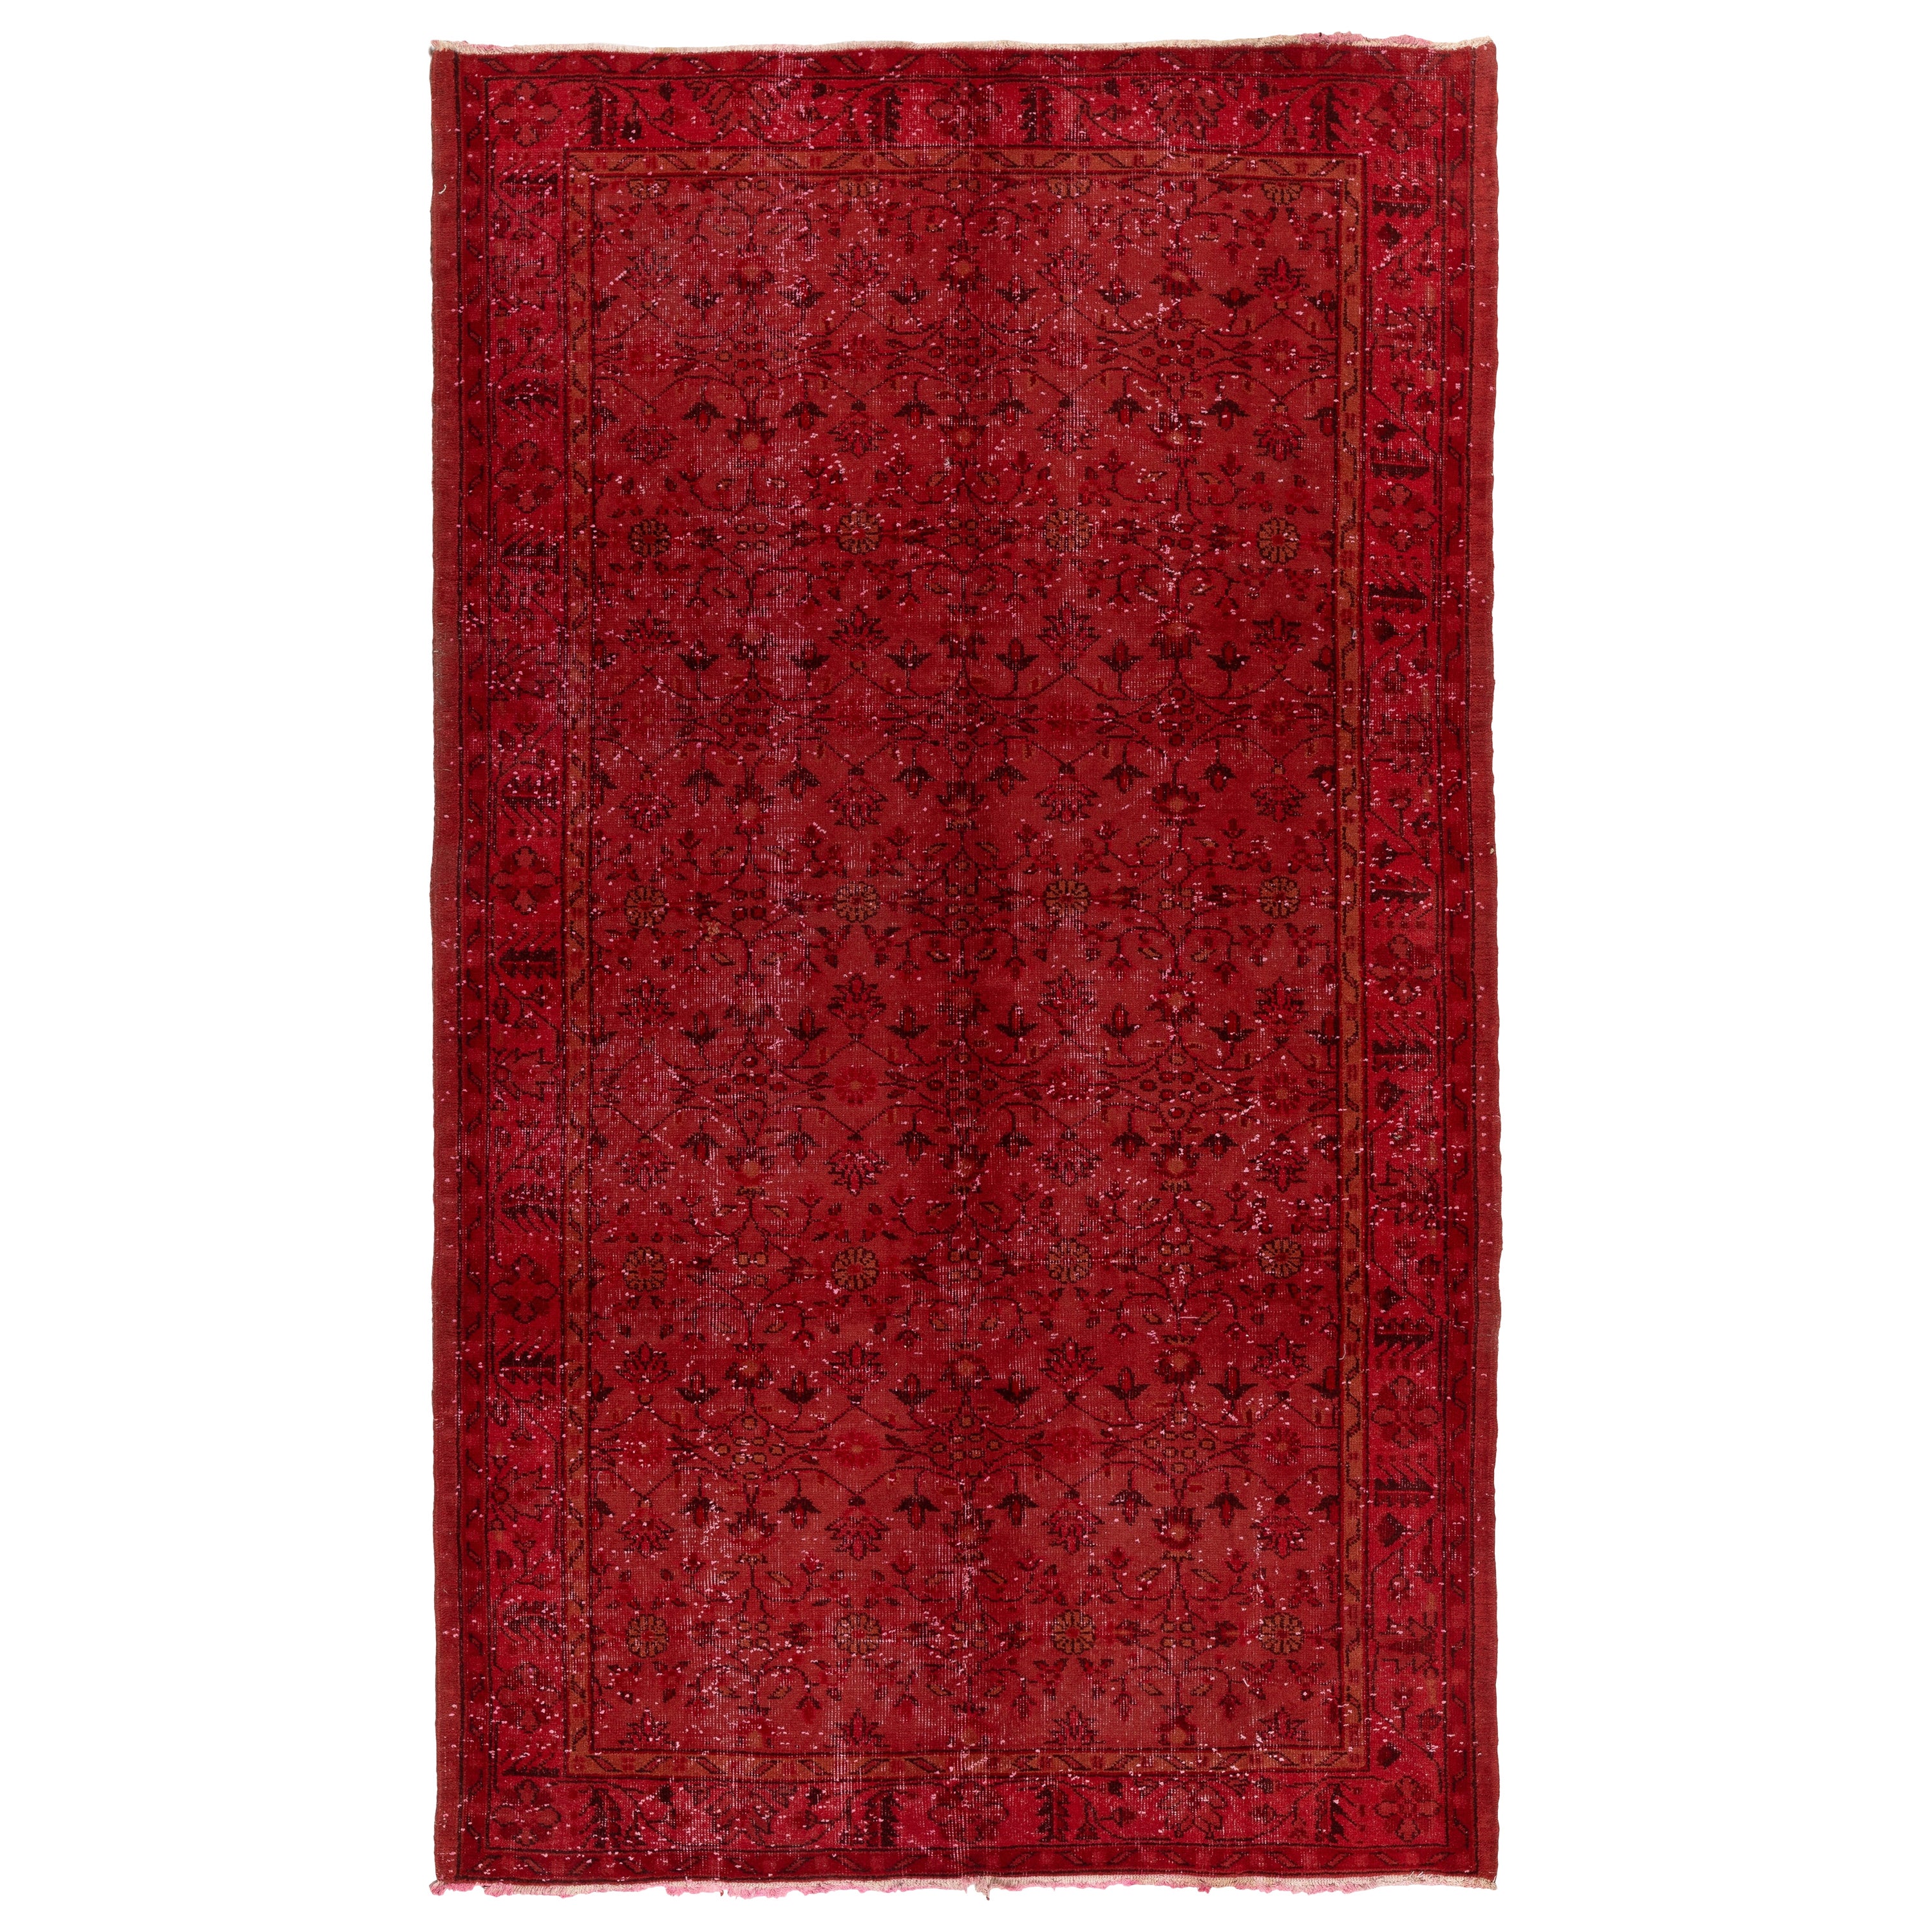 5.6x9.2 Ft Modern Home Decor Handmade Anatolian Rug in Red with Floral Design